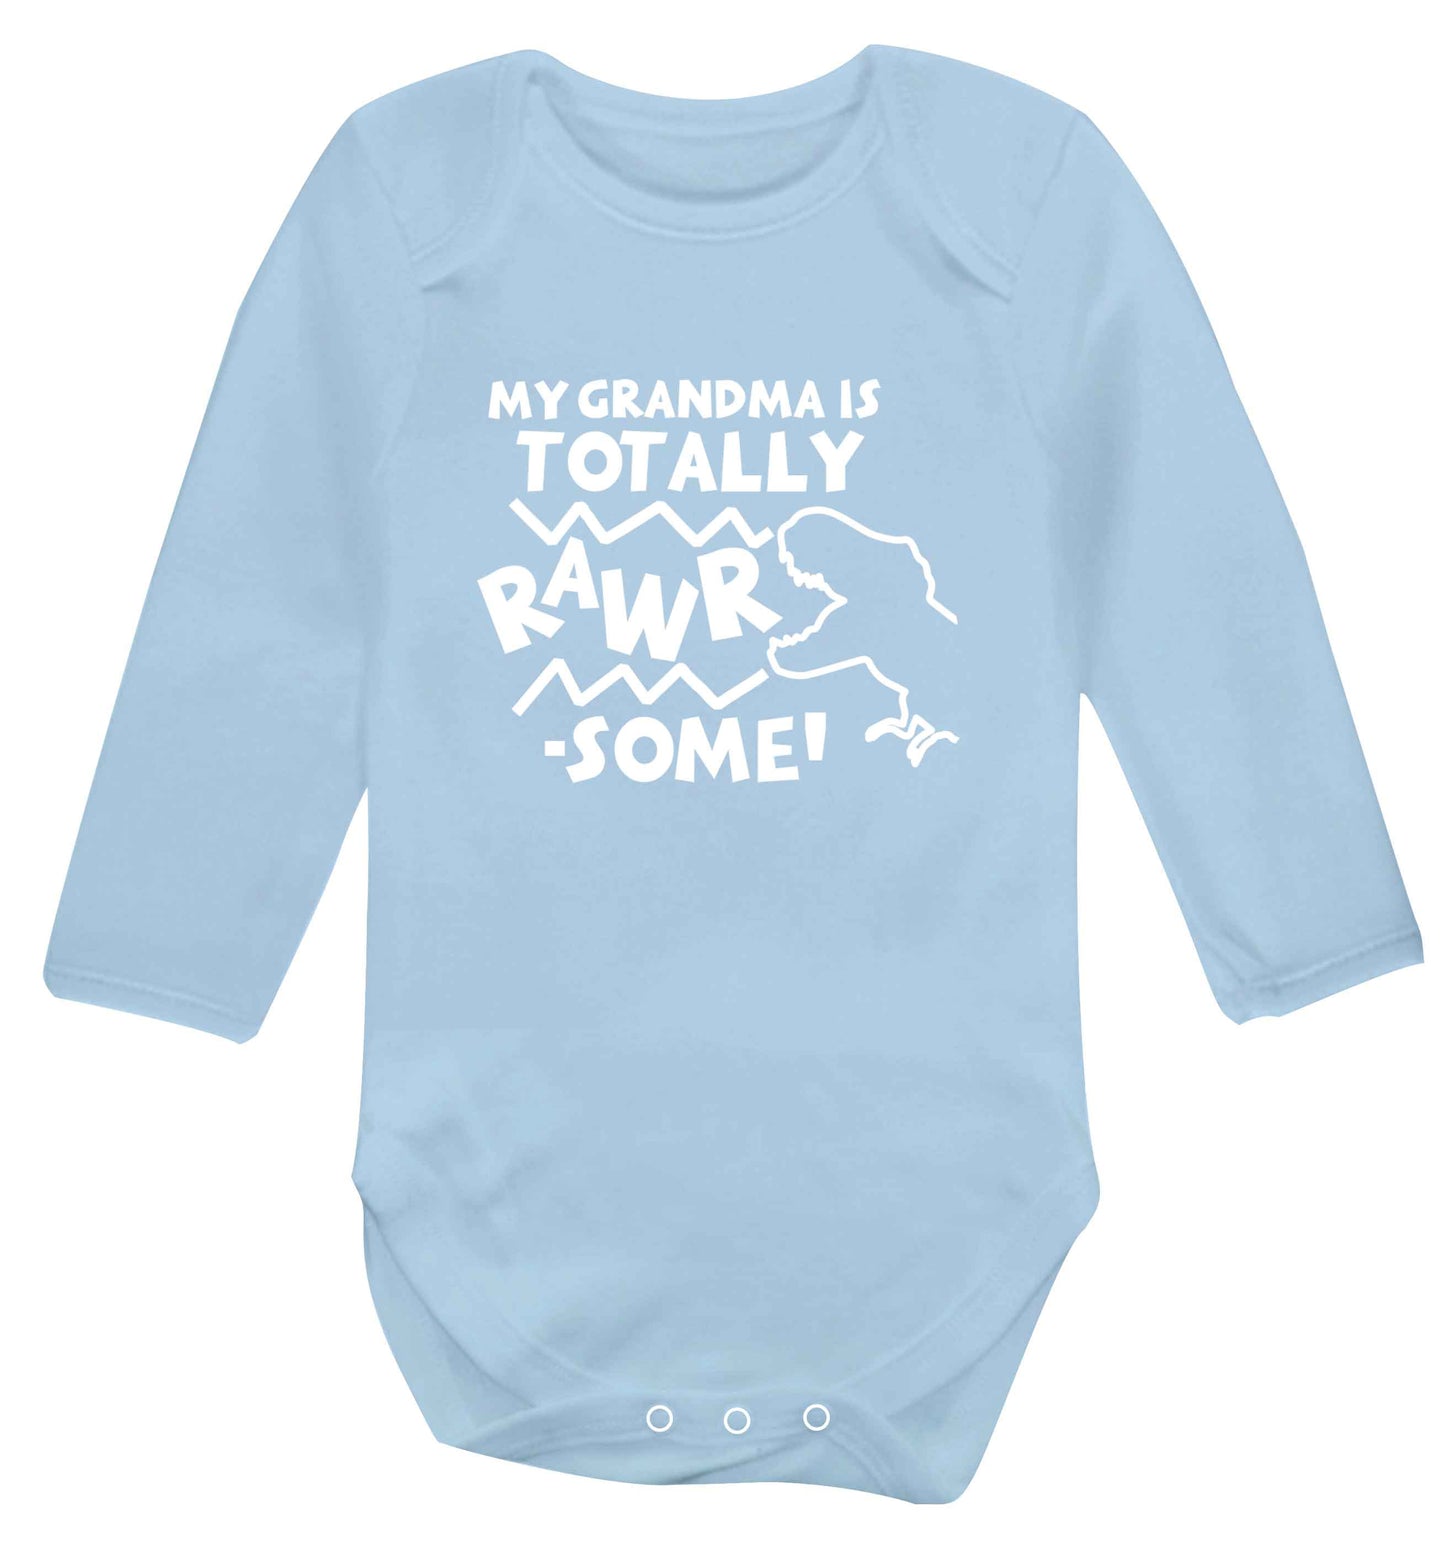 My grandma is totally rawrsome baby vest long sleeved pale blue 6-12 months